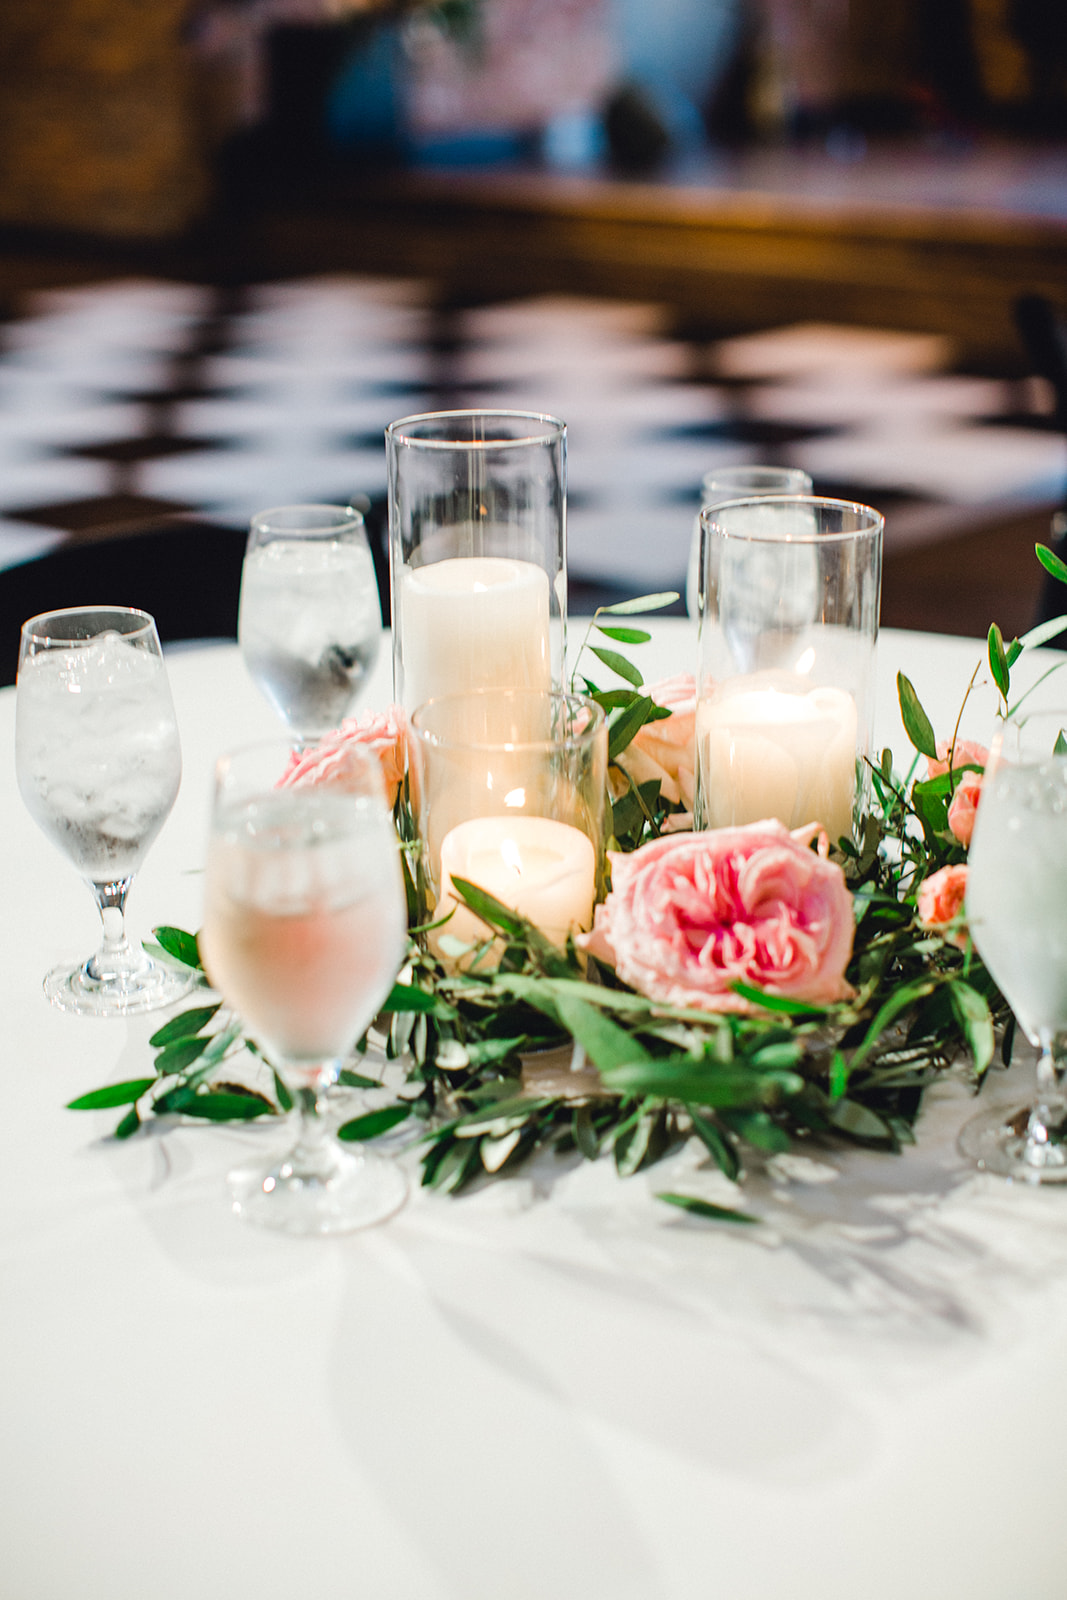 Wedding centerpieces with candles